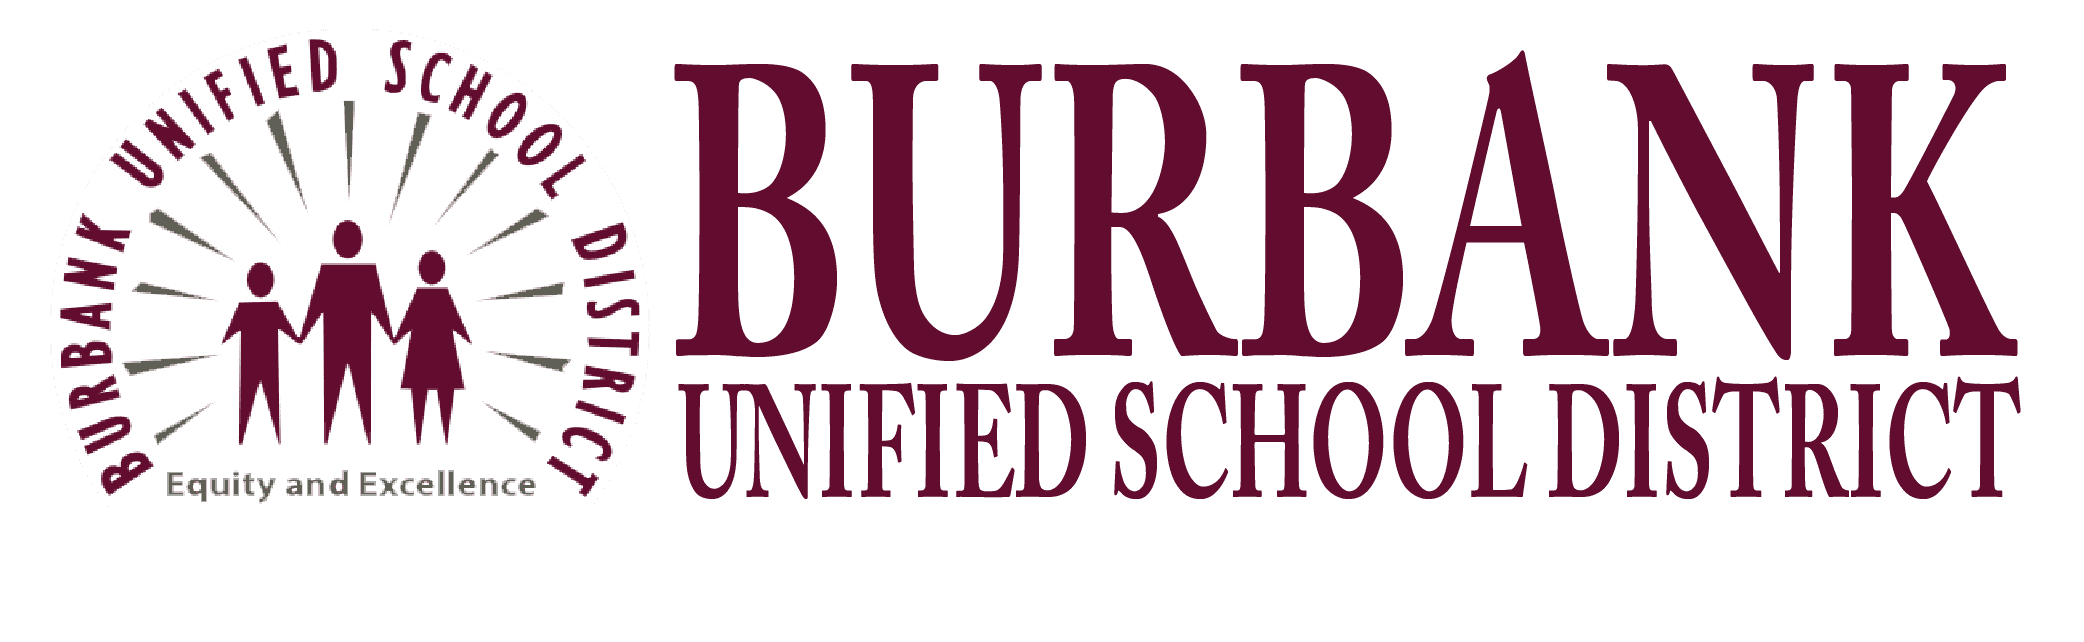 A logo of burbs unified school district